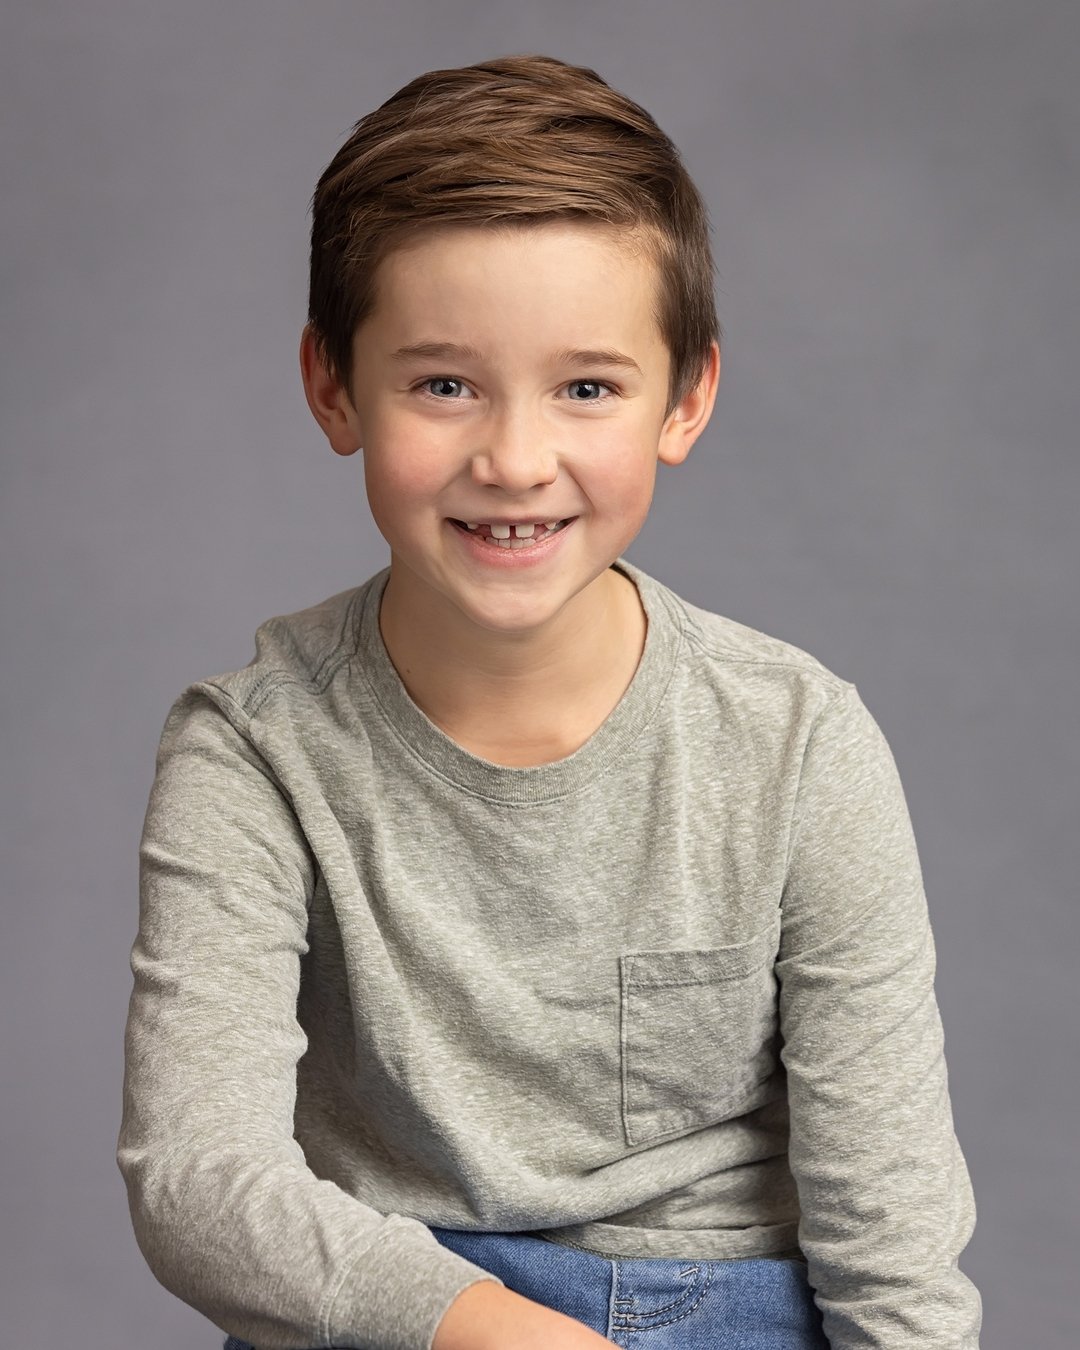 📸 Capturing the essence of your child with an authentic headshot is my passion! Whether they are needing updated professional portraits for their modelling portfolio, sports profile or needing to replace those not-so-authentic school photos😉, I'm h